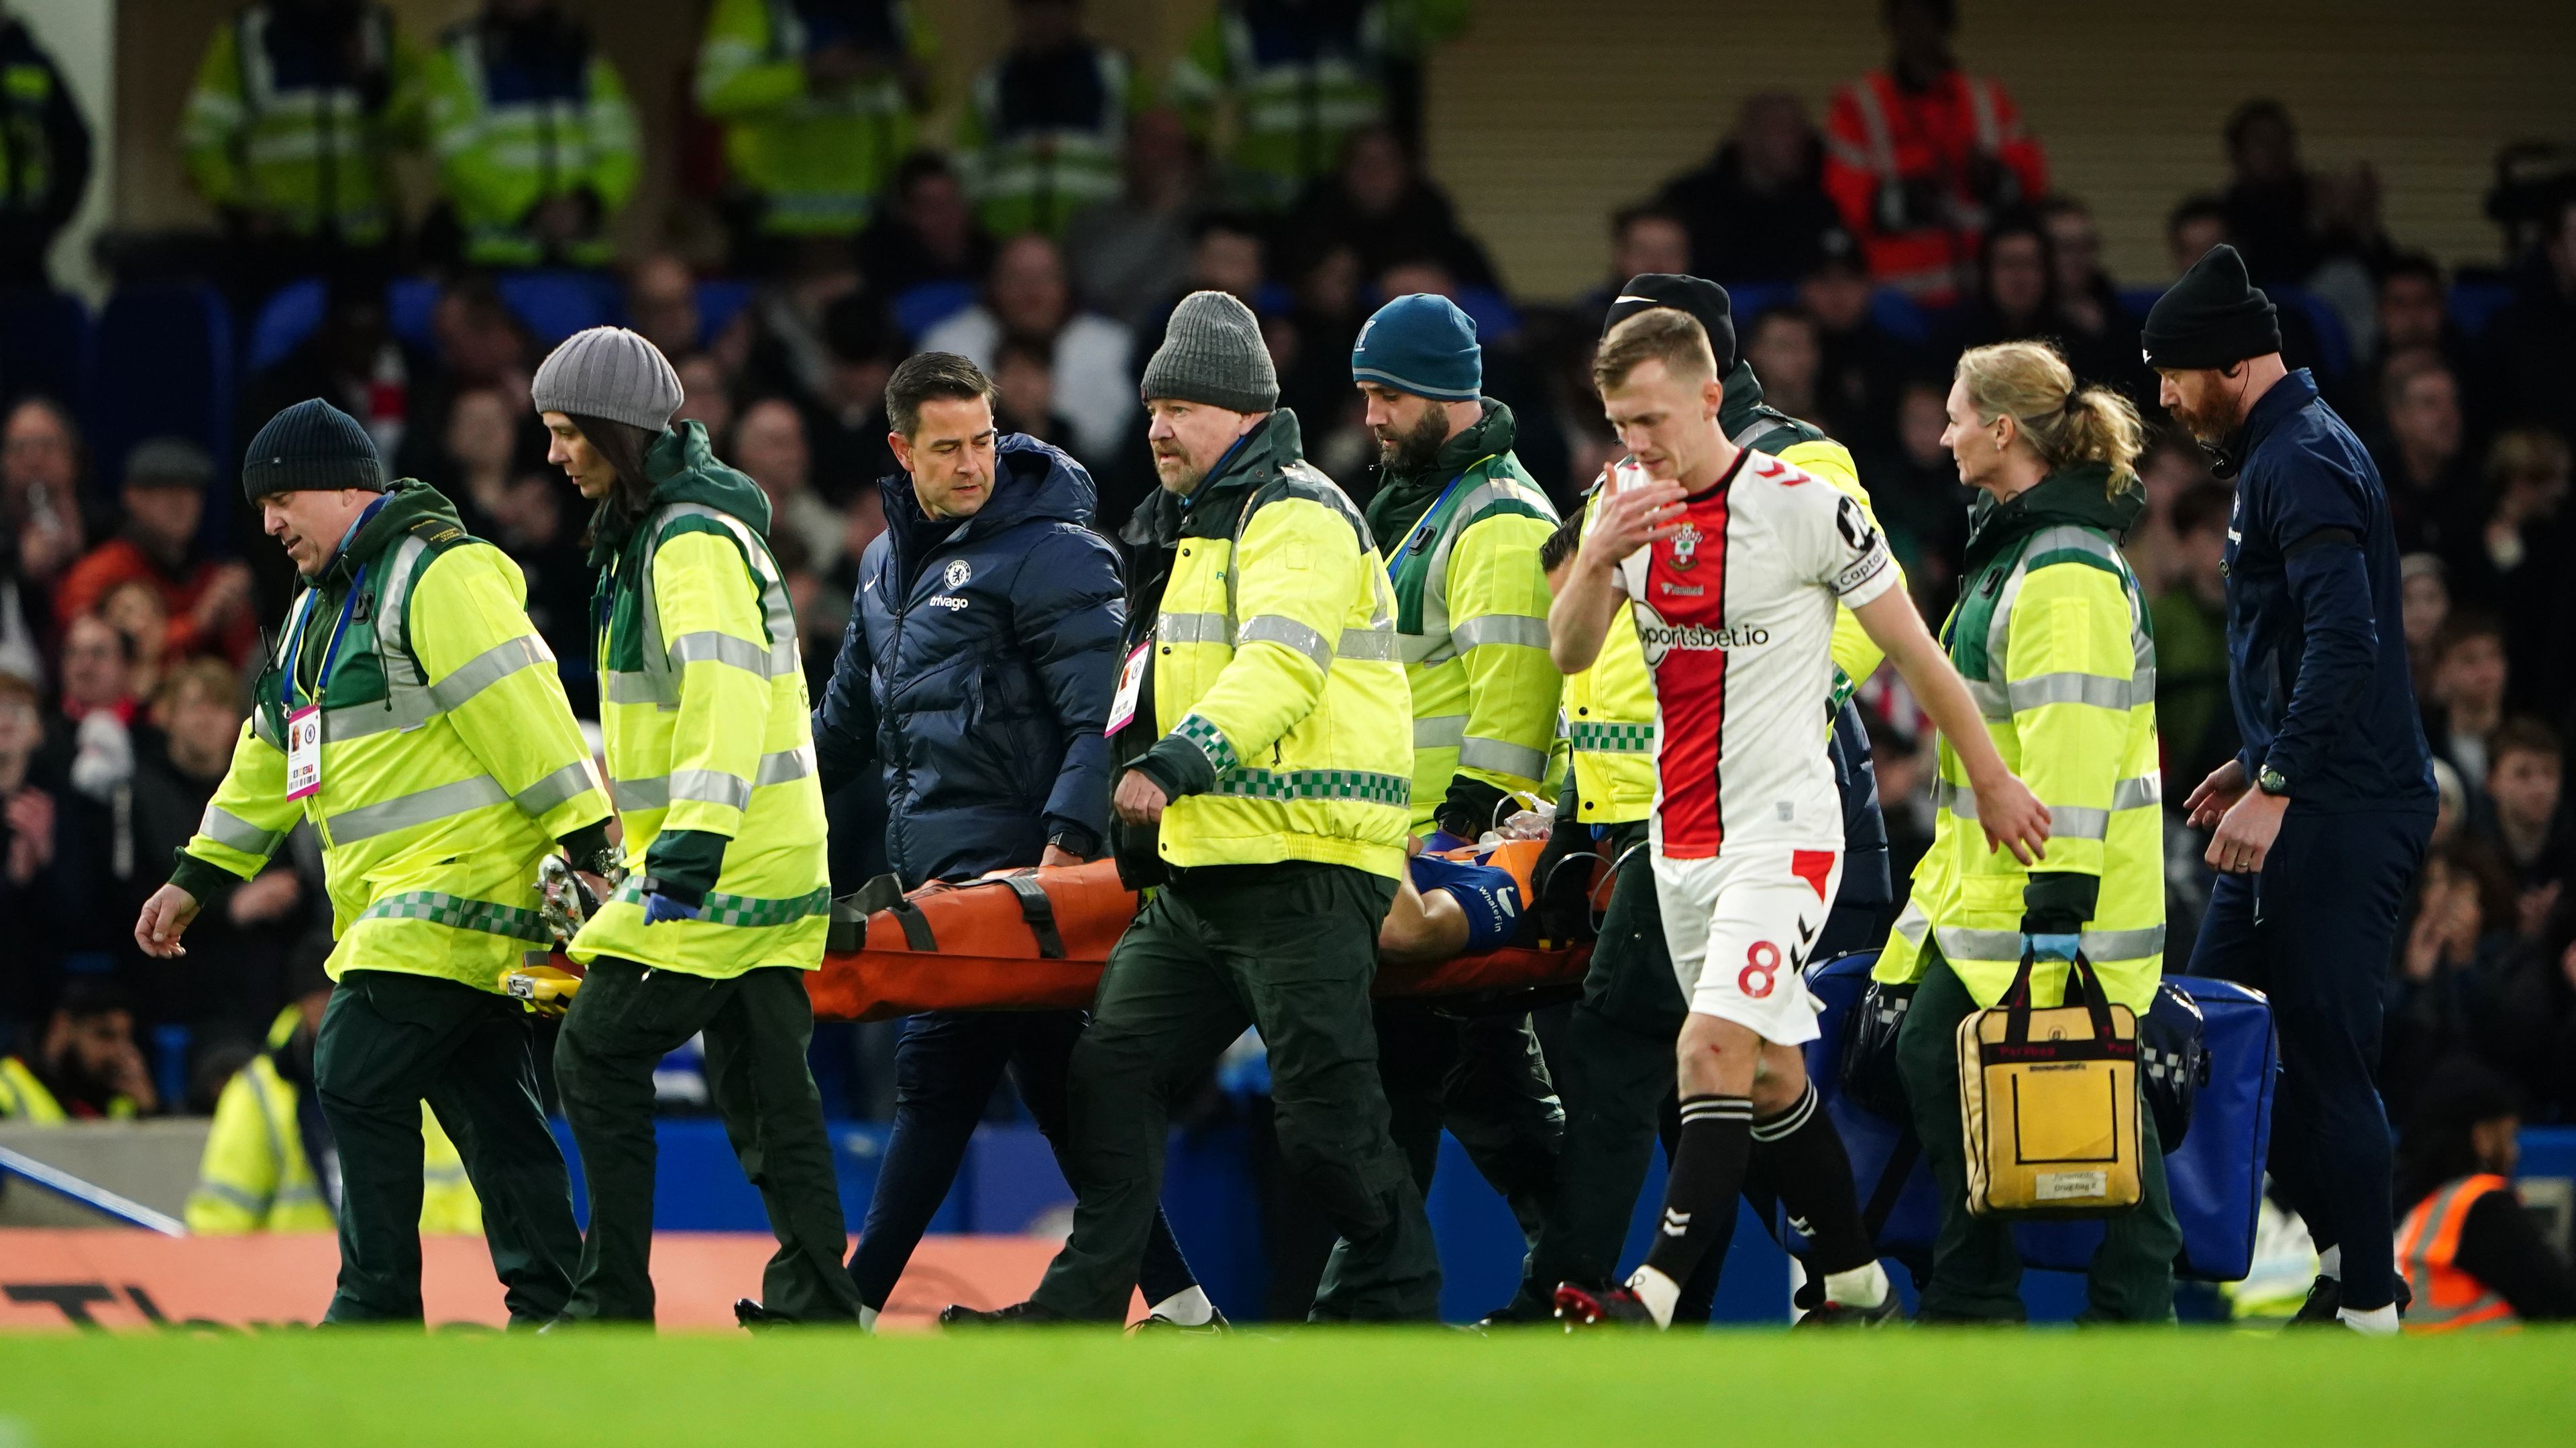 Chelsea&#x27;s Cesar Azpilicueta is stretchered off during the Premier League match at Stamford Bridge, London. (Photo by Zac Goodwin/PA Images via Getty Images)